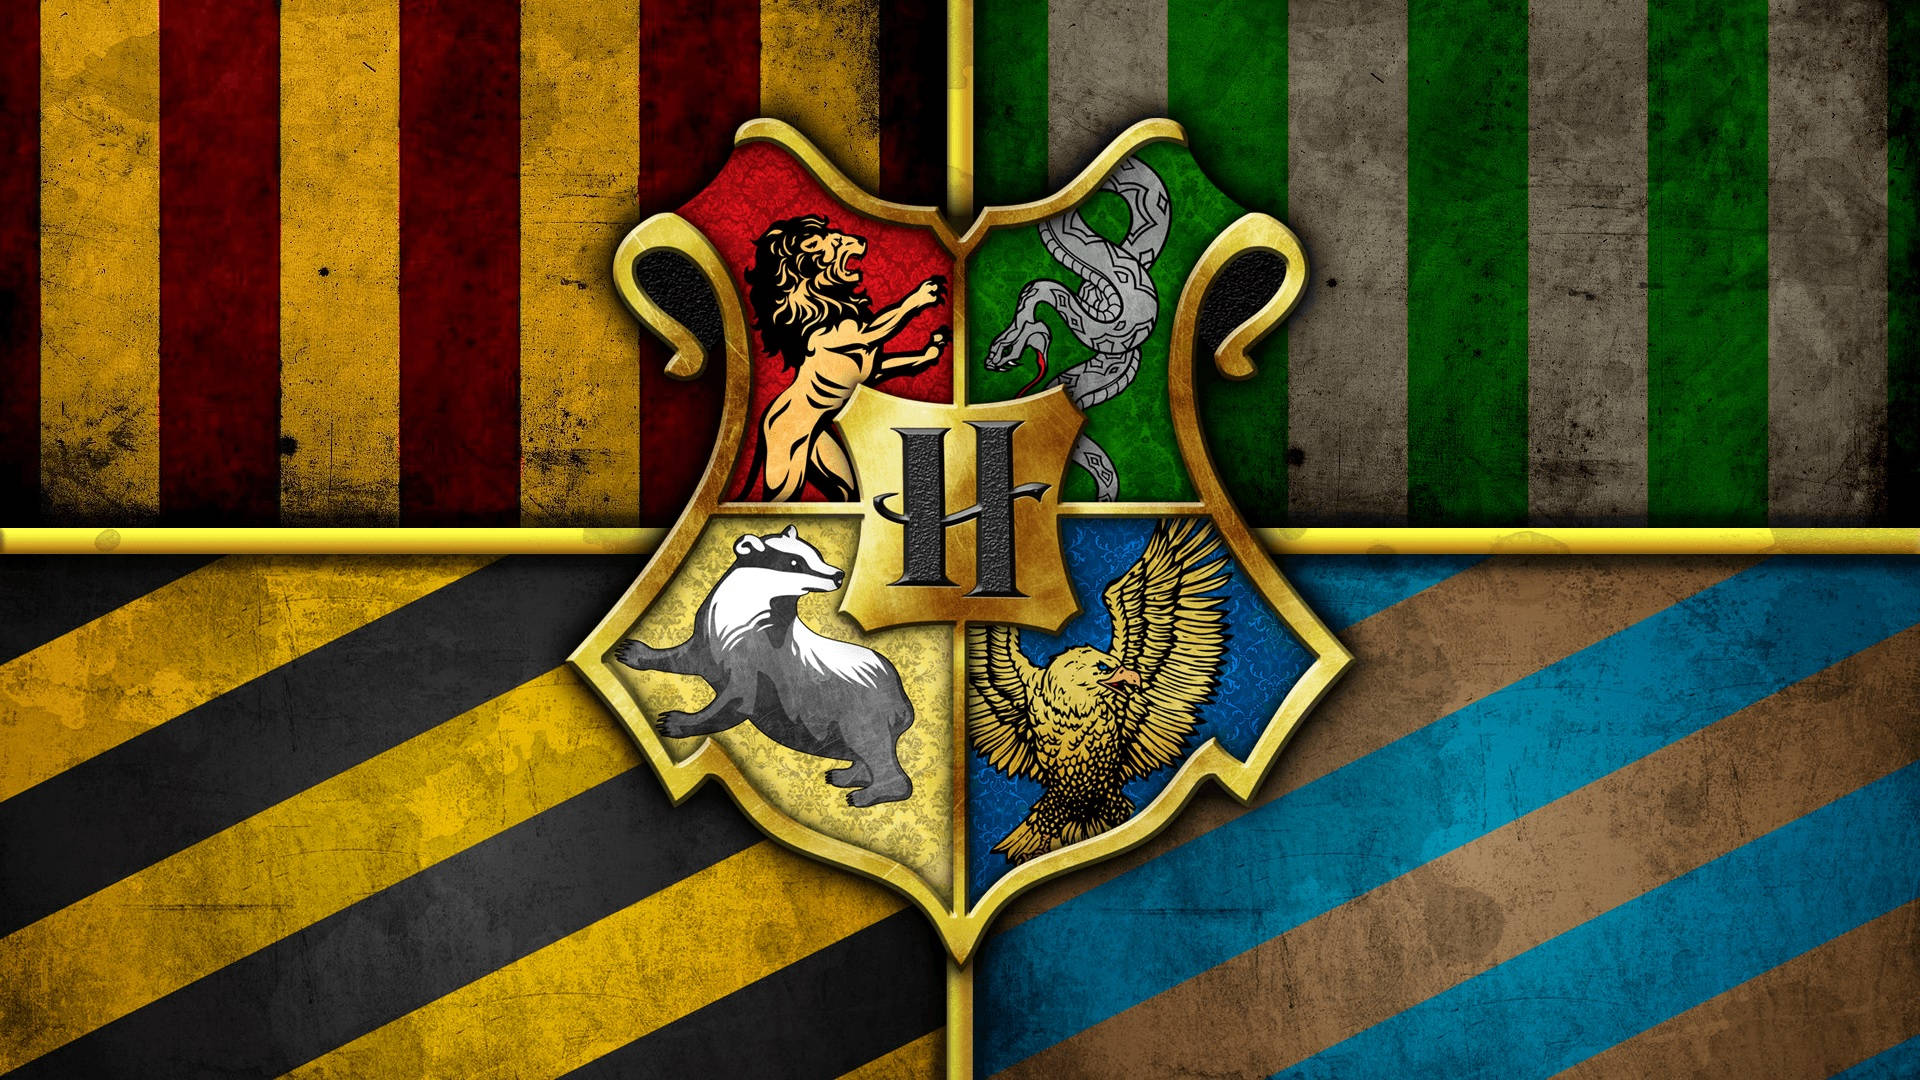 100+] Harry Potter Houses Wallpapers for FREE 